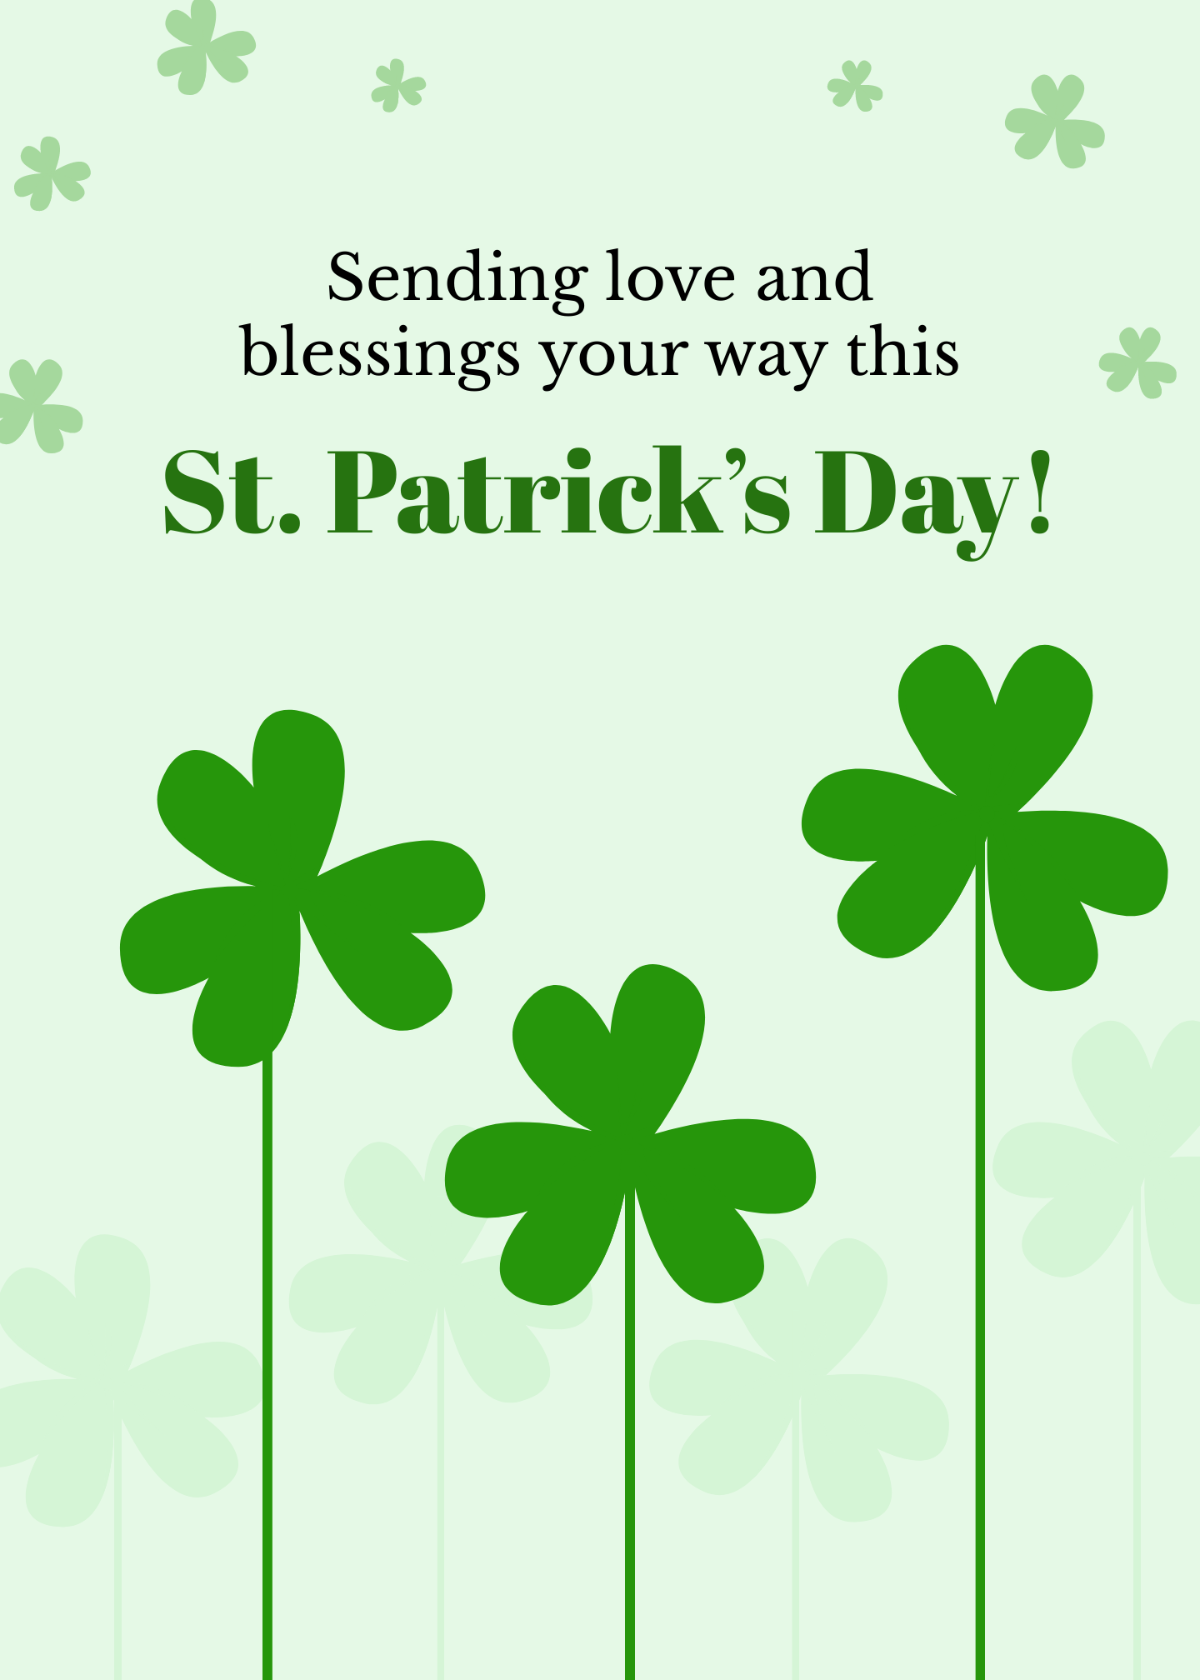 St. Patrick's Day Wishes Template